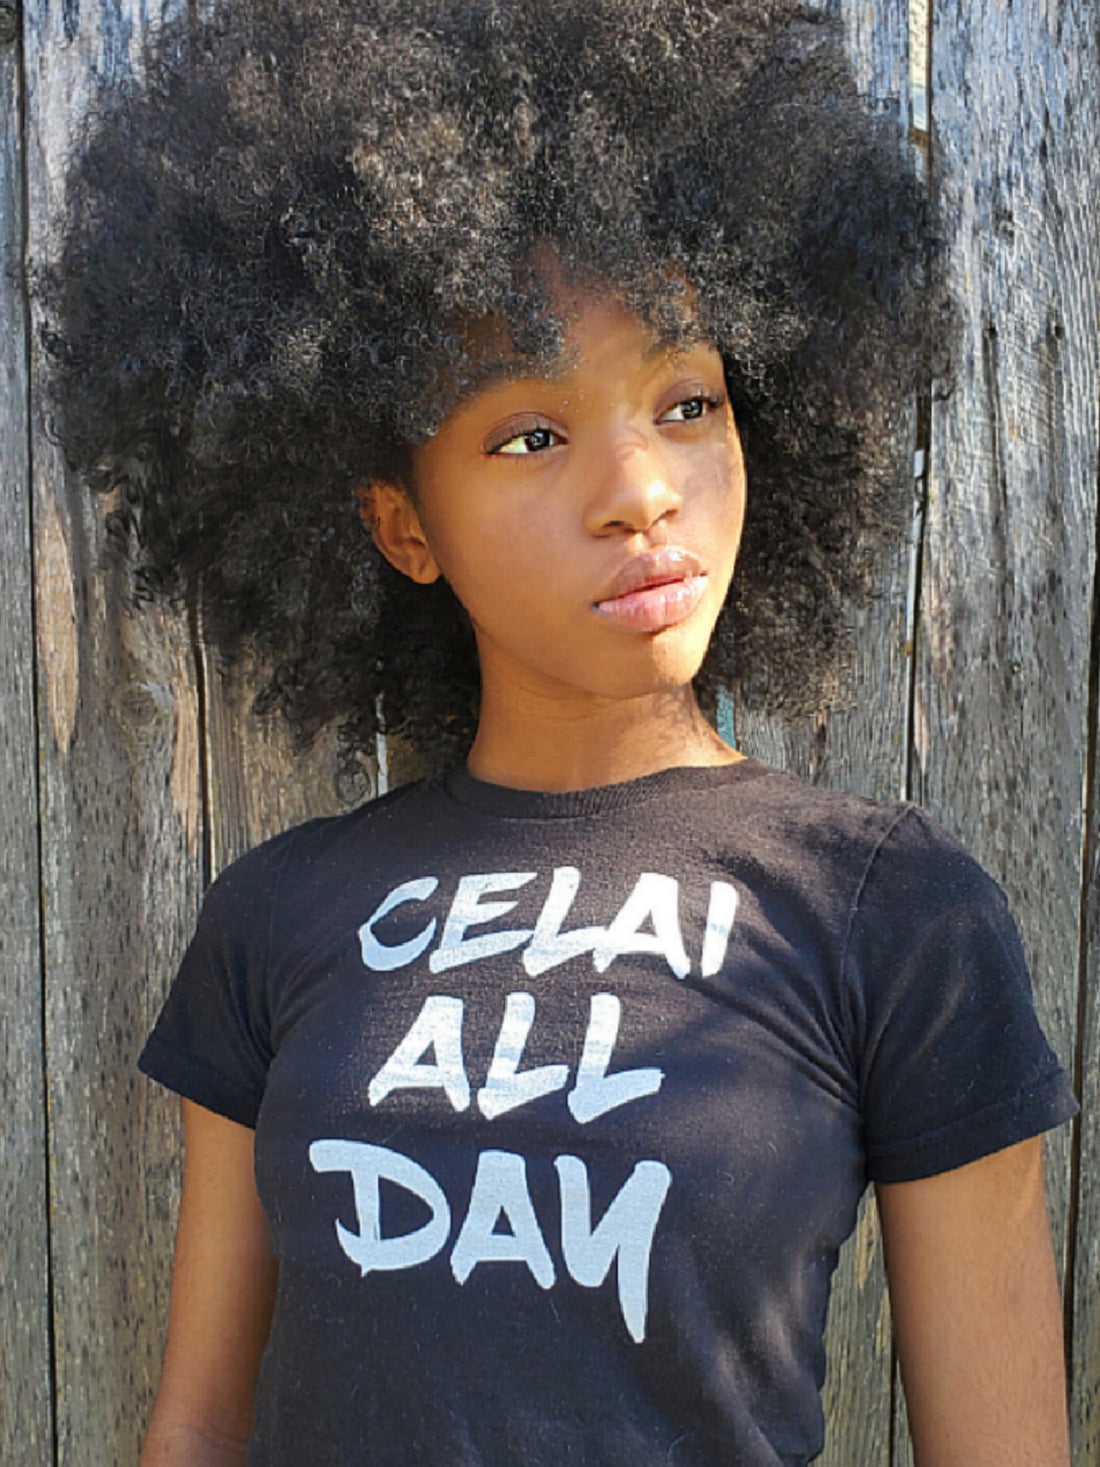 "Celai All Day" Tee NOW AVAILABLE! While supplies last...